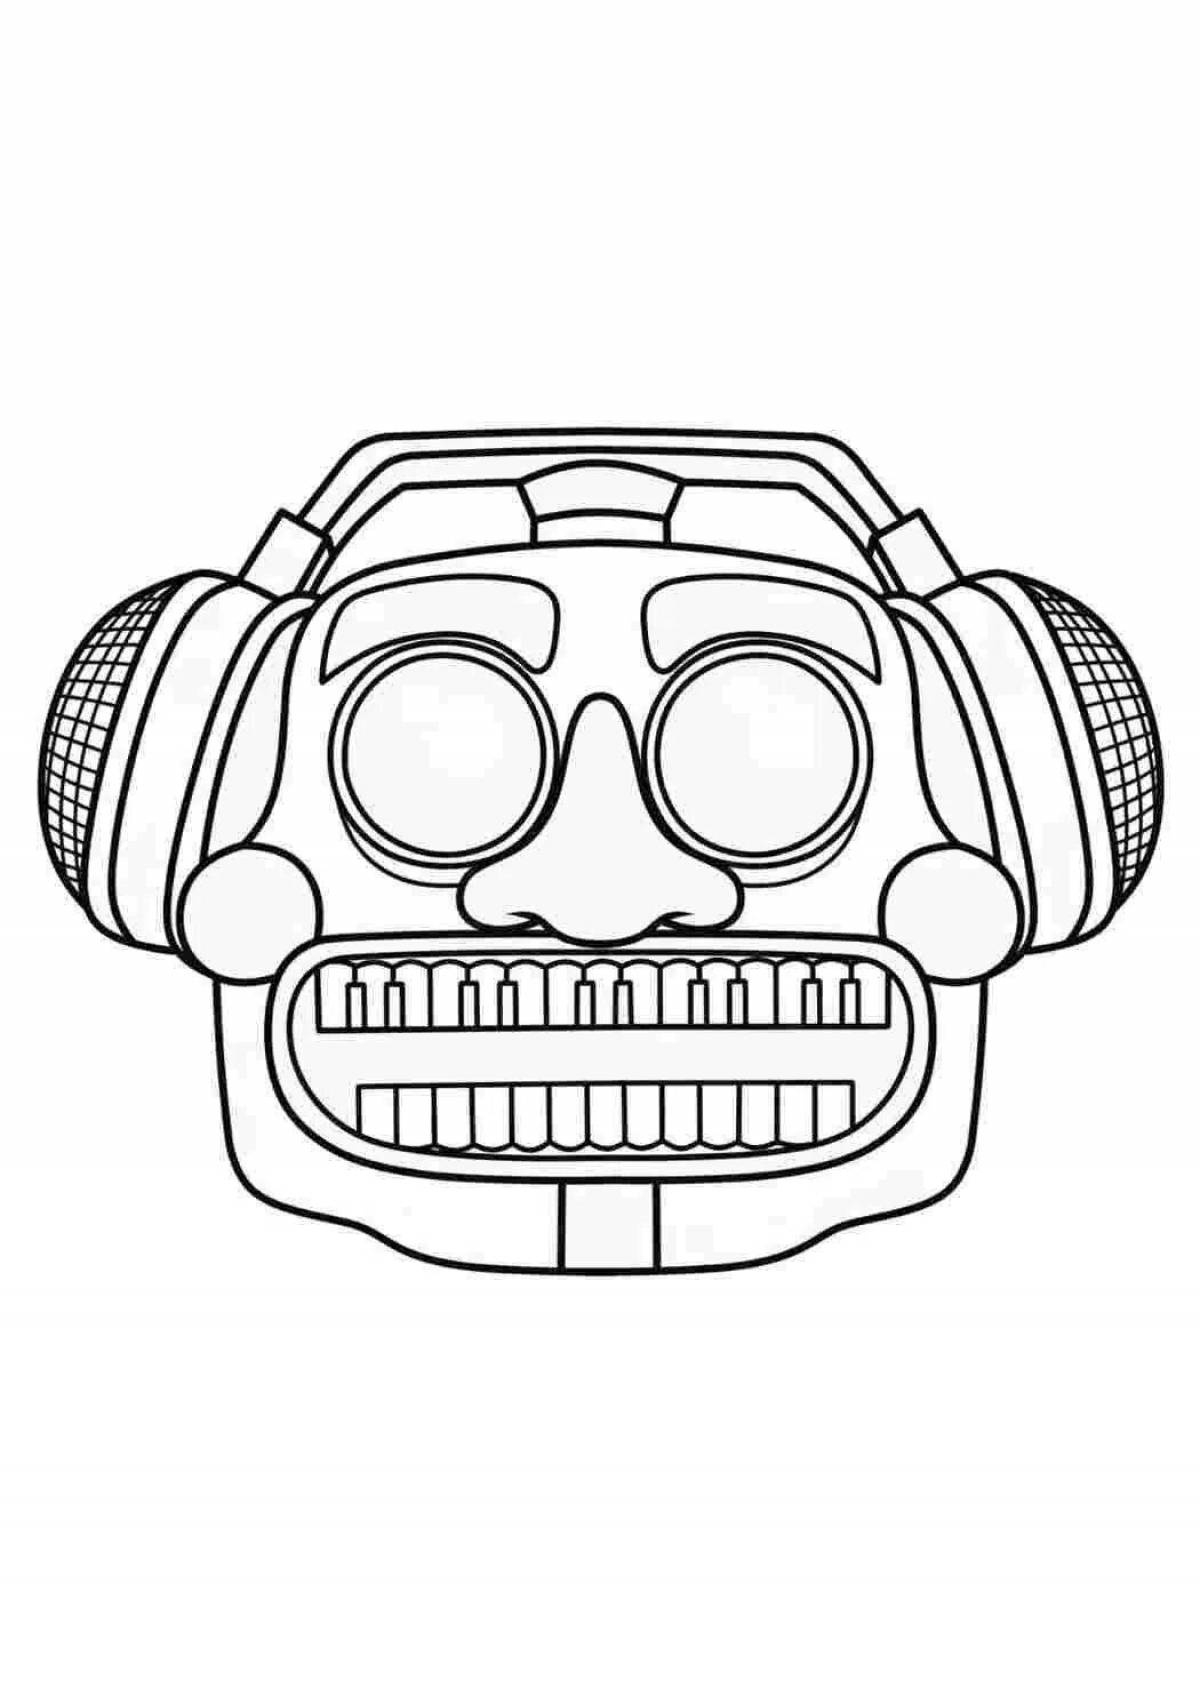 Beautiful bonnie's mask coloring page